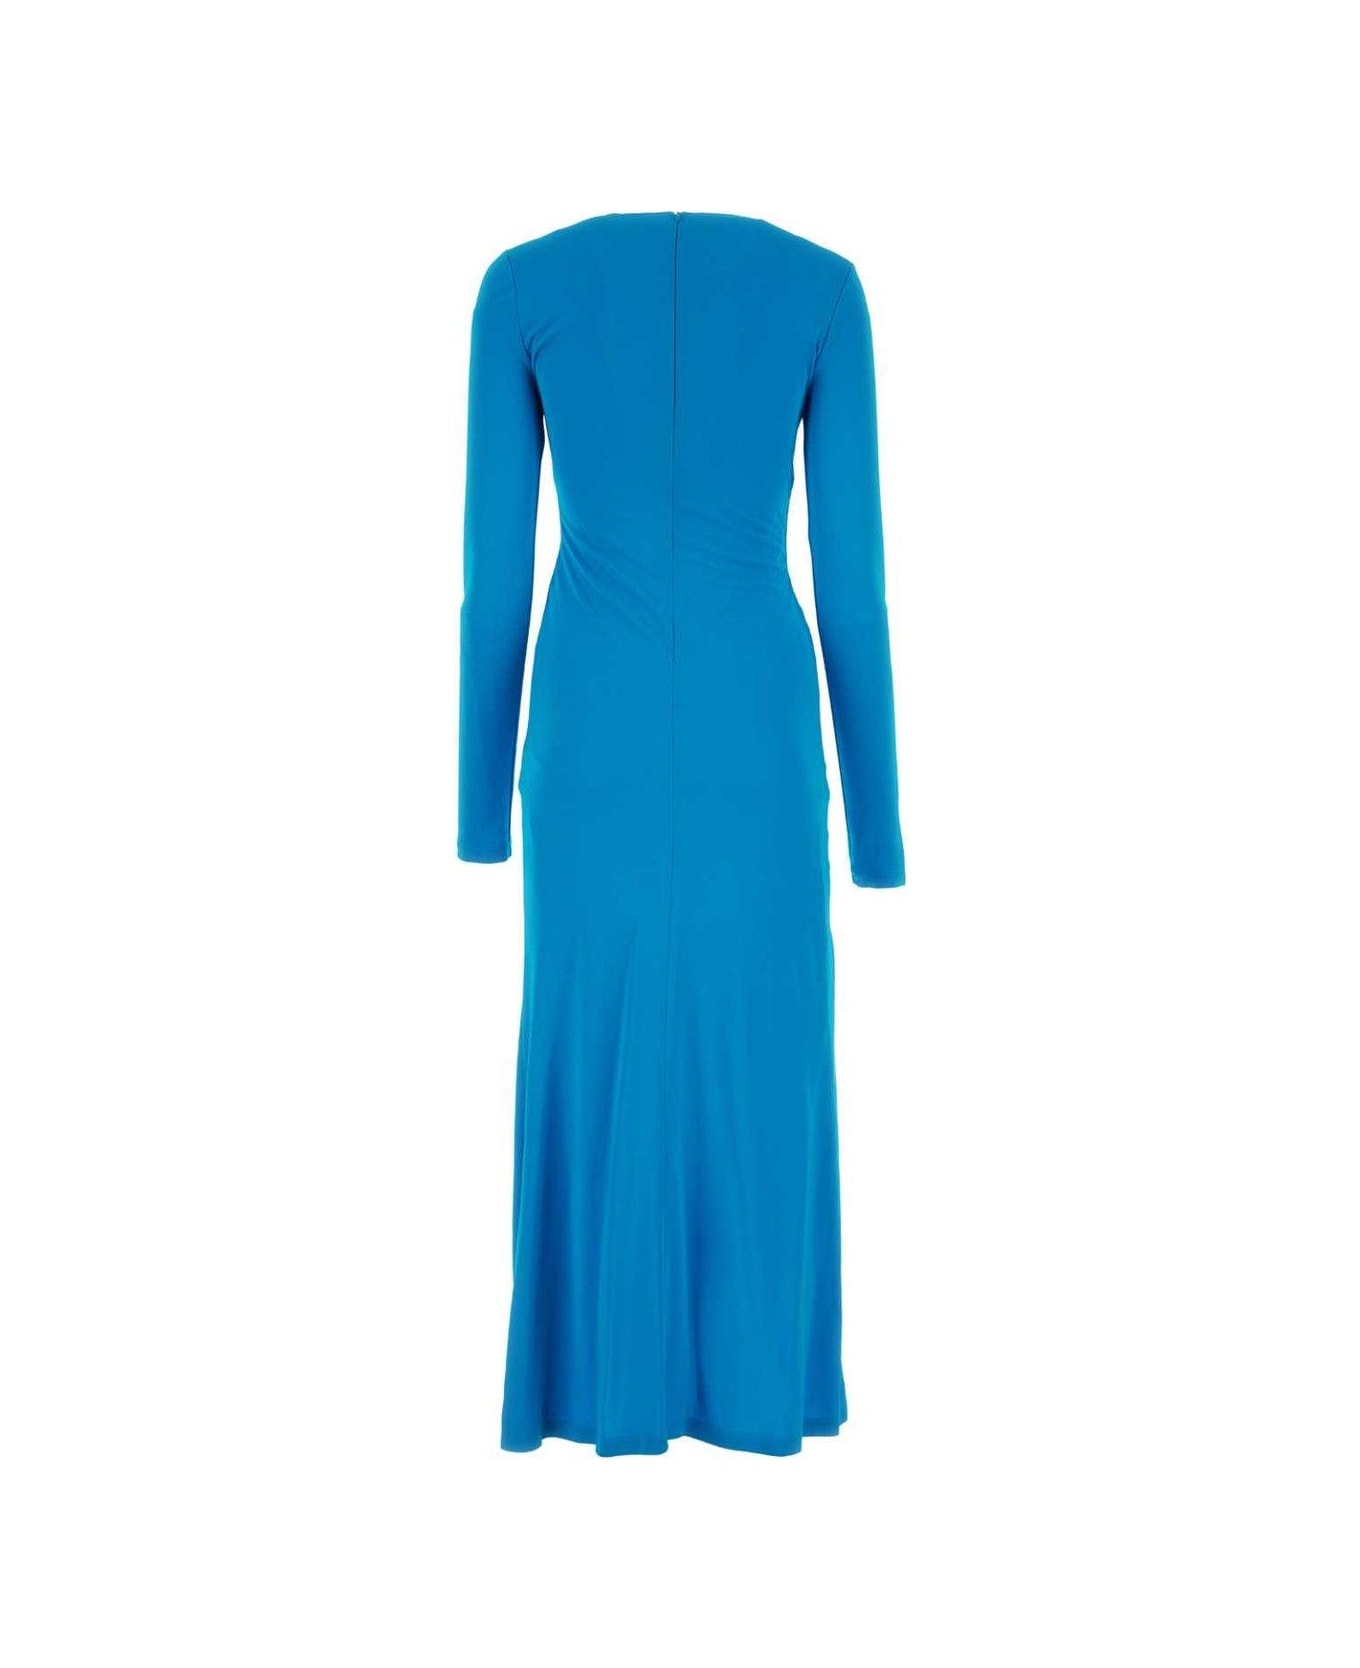 Givenchy Long-sleeved Dress